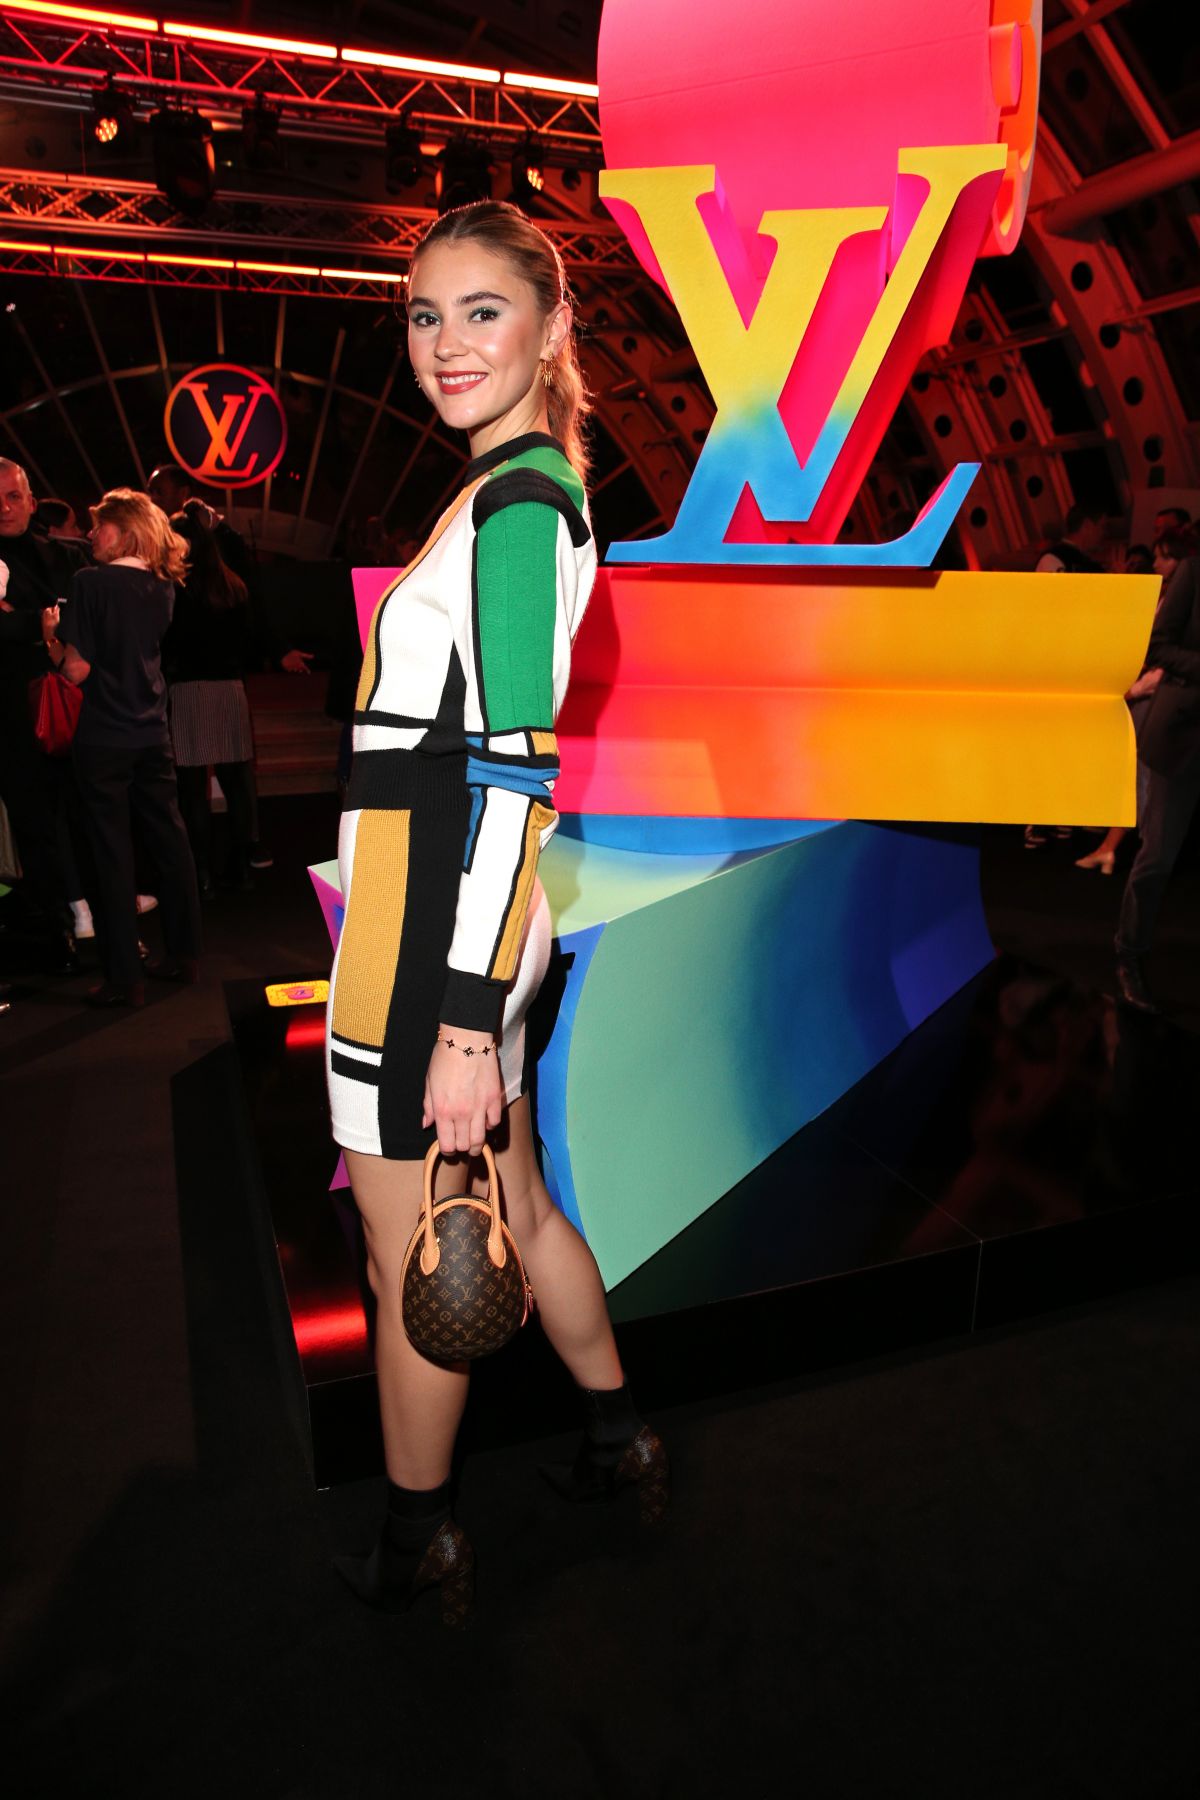 Louis Vuitton Seoul Flagship Store Opening Welcome Dinner